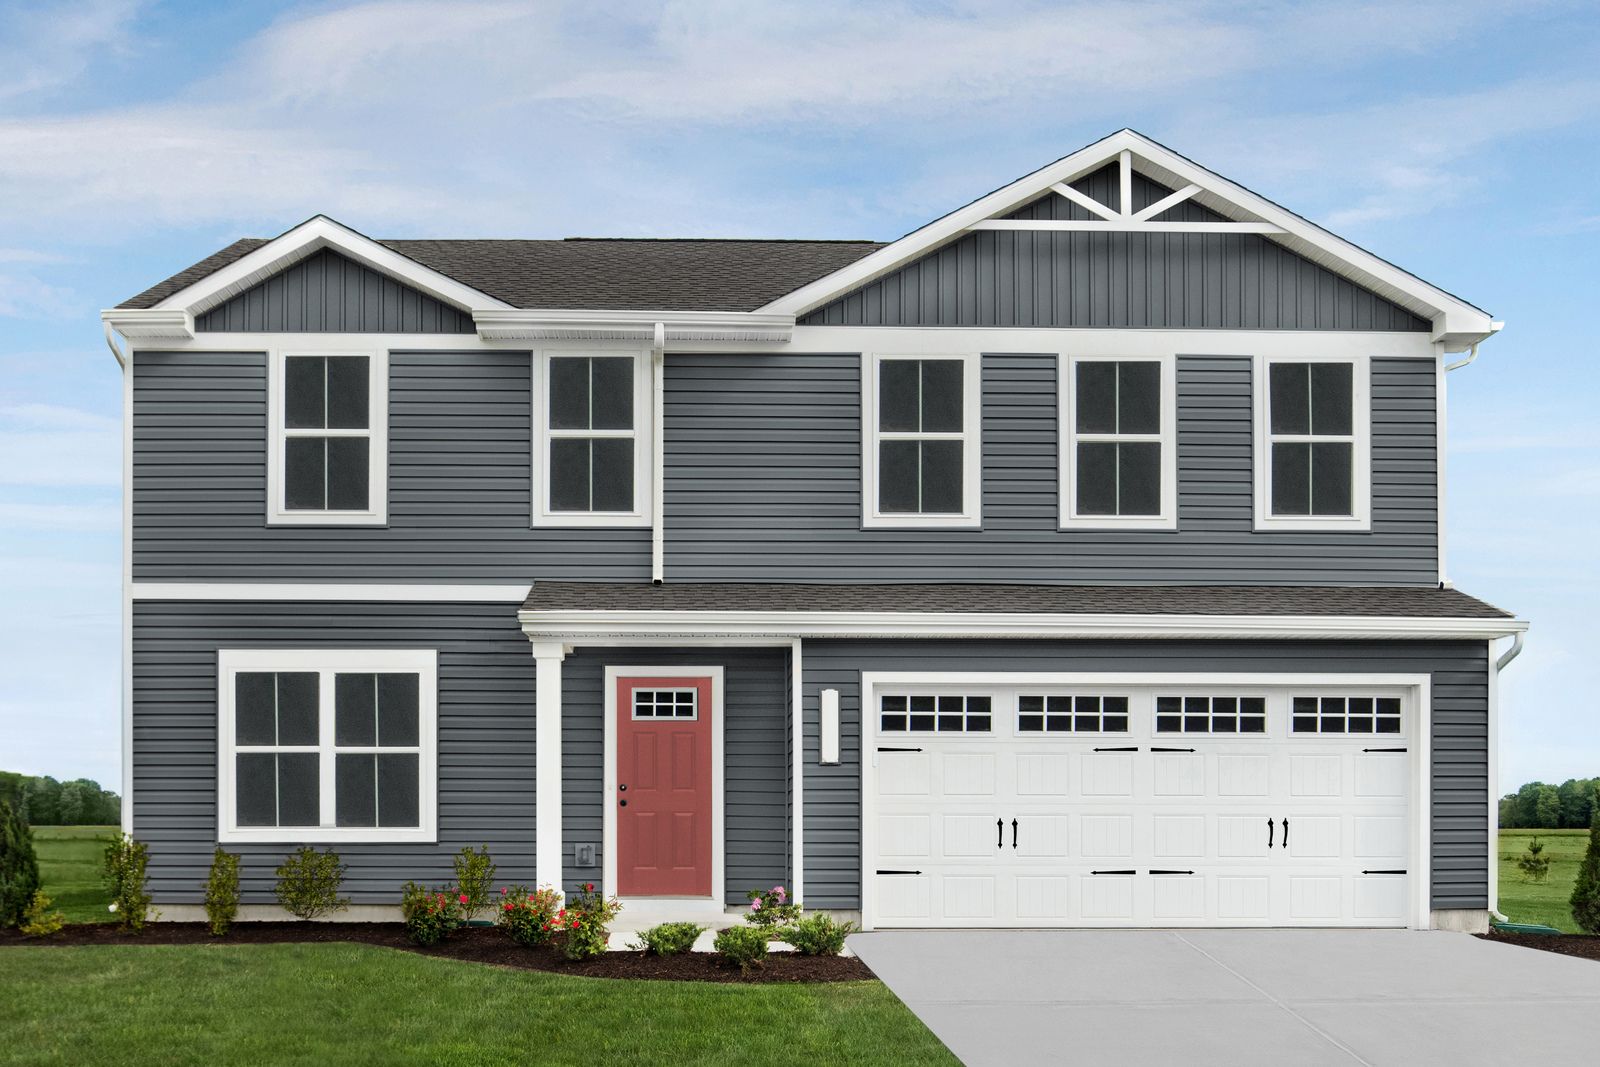 Sunbrook: New 2-story homes in Lebanon from the mid $200s